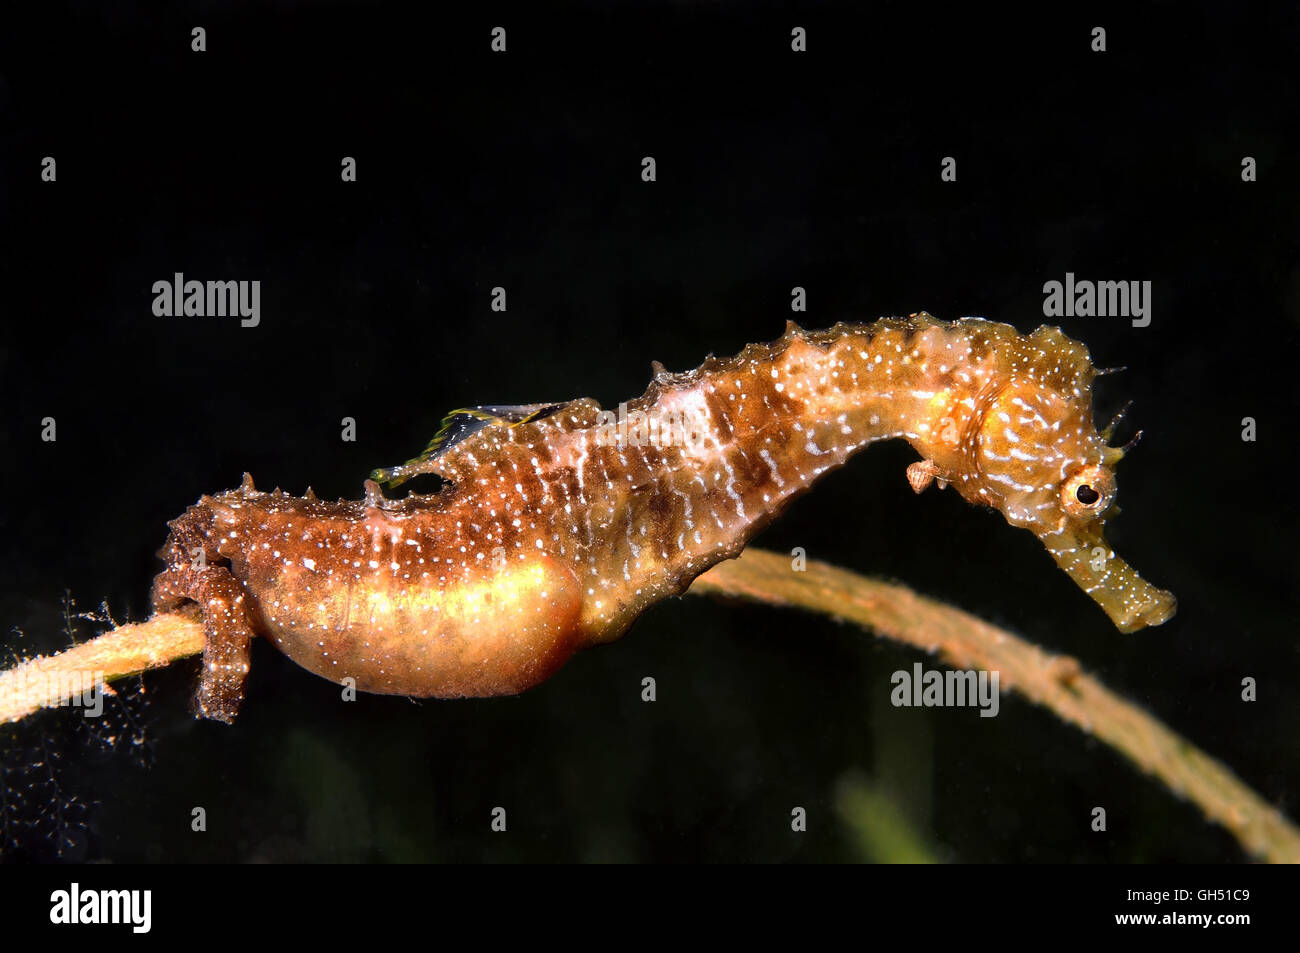 Maned Seahorse or Long-snouted seahorse (Hippocampus guttulatus) male with caviar, Black Sea Stock Photo